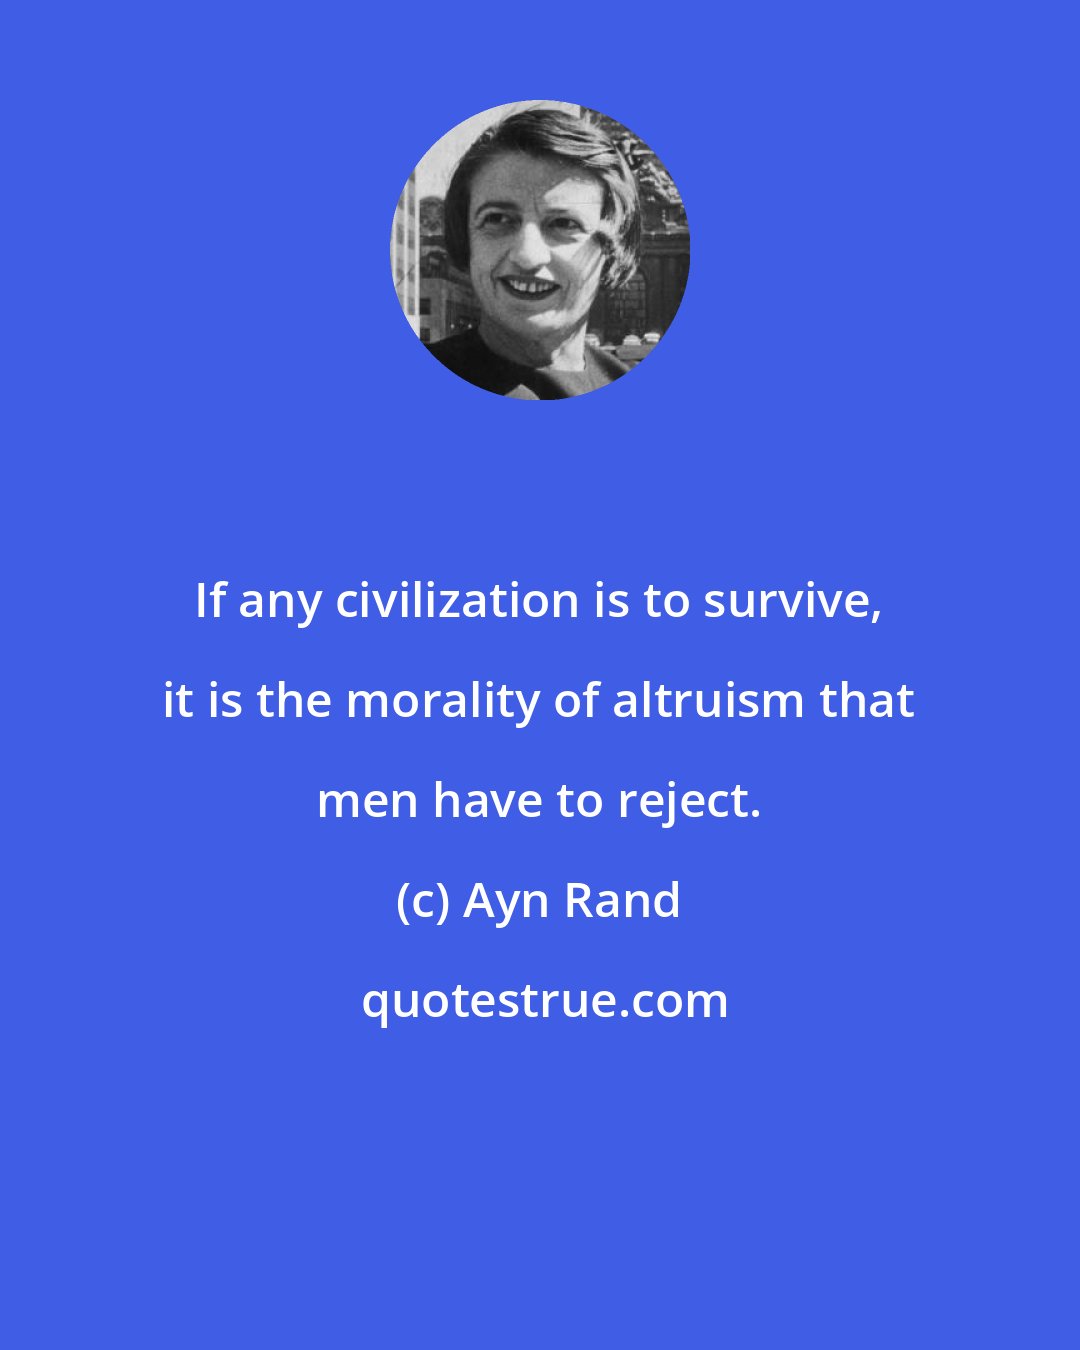 Ayn Rand: If any civilization is to survive, it is the morality of altruism that men have to reject.